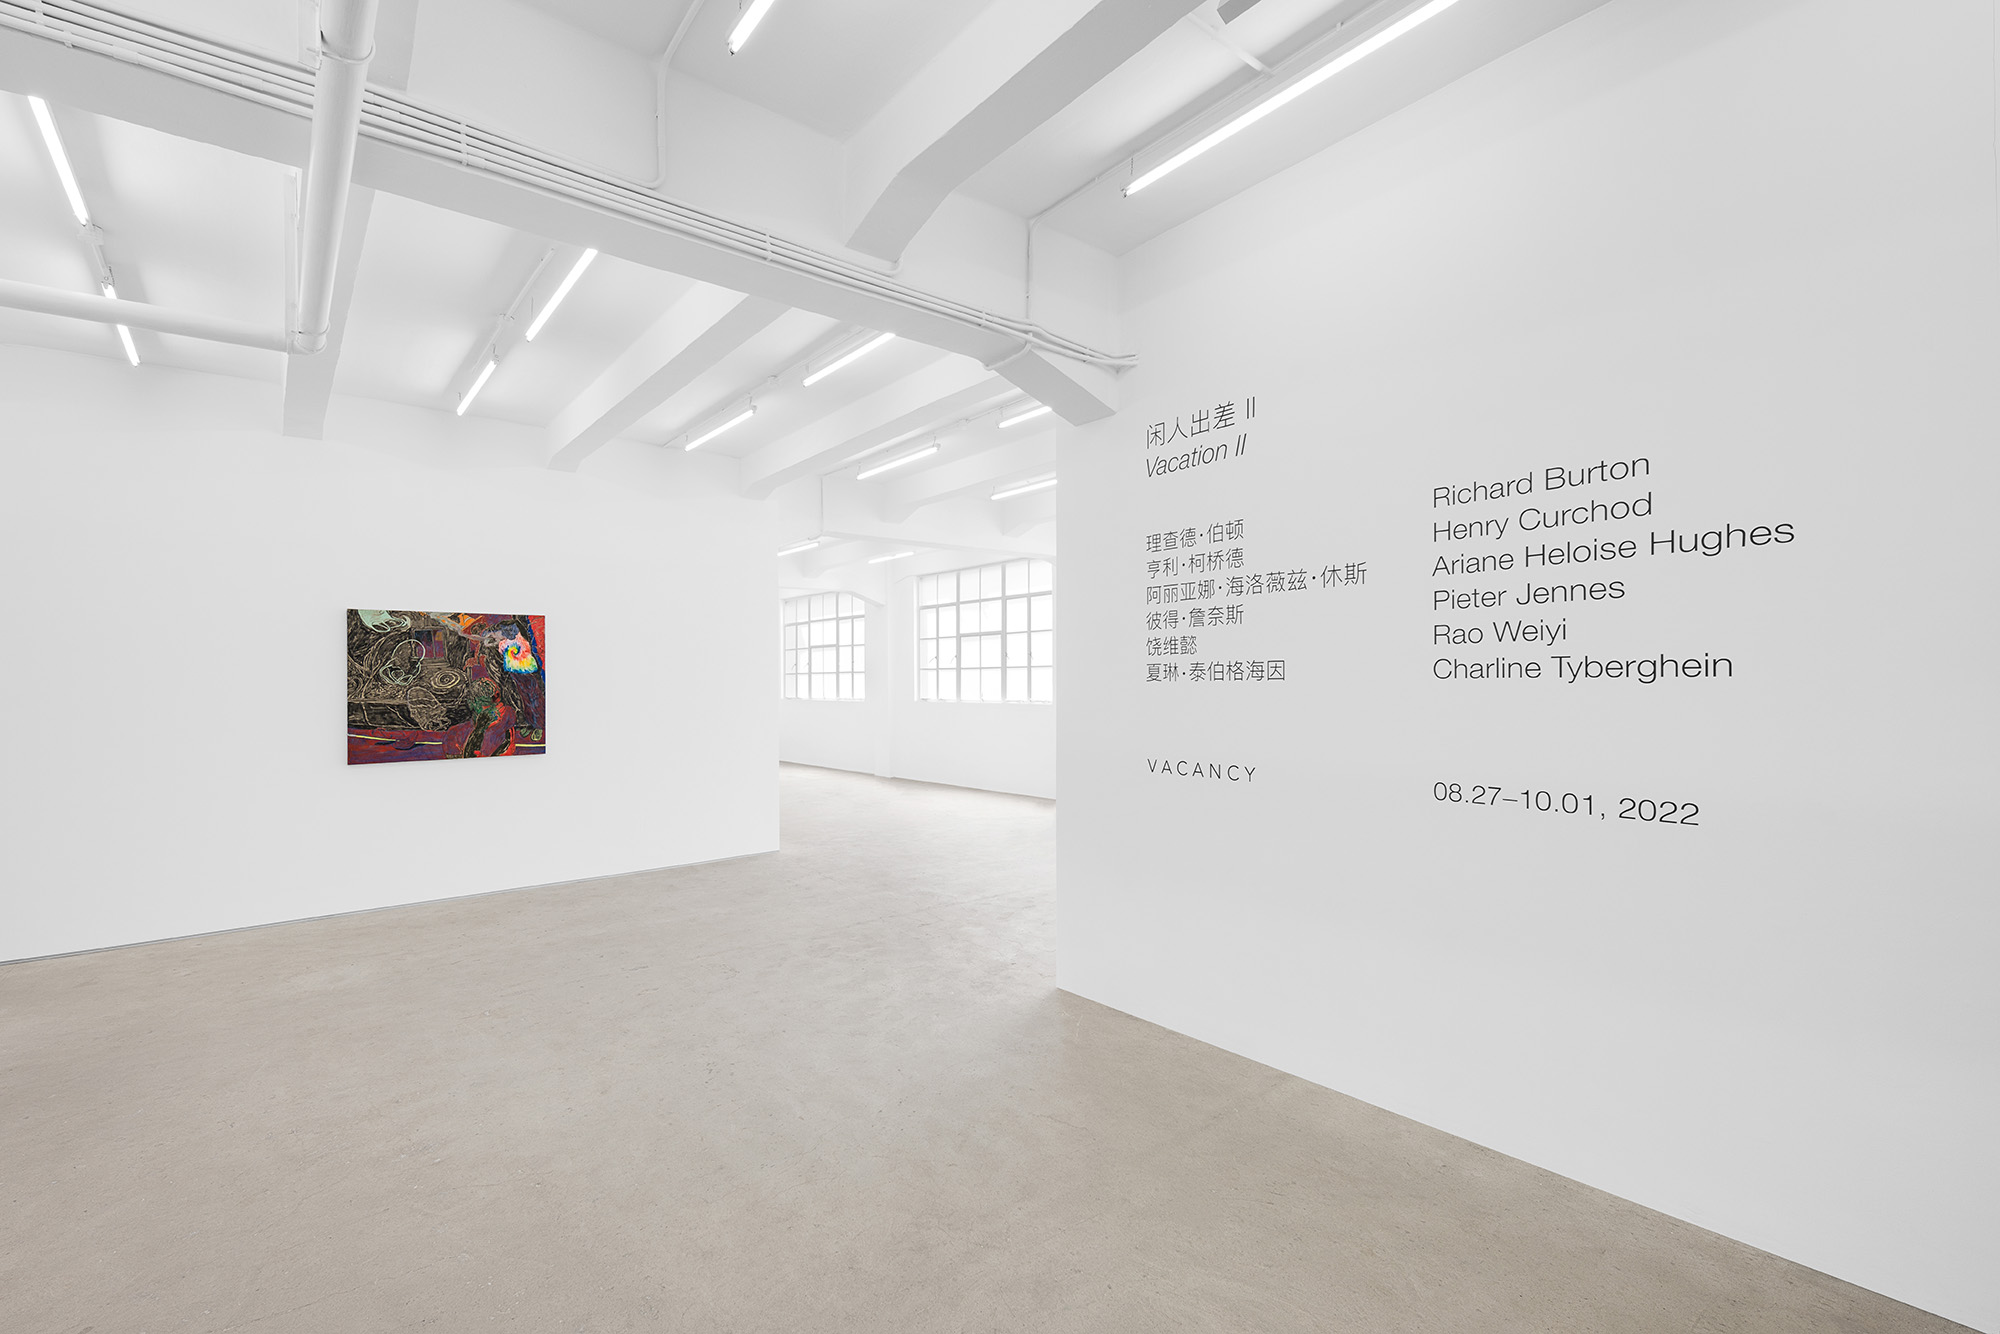 Installation view of group exhibition, Vacation II, at Gallery Vacancy, featuring work by Henry Curchod.